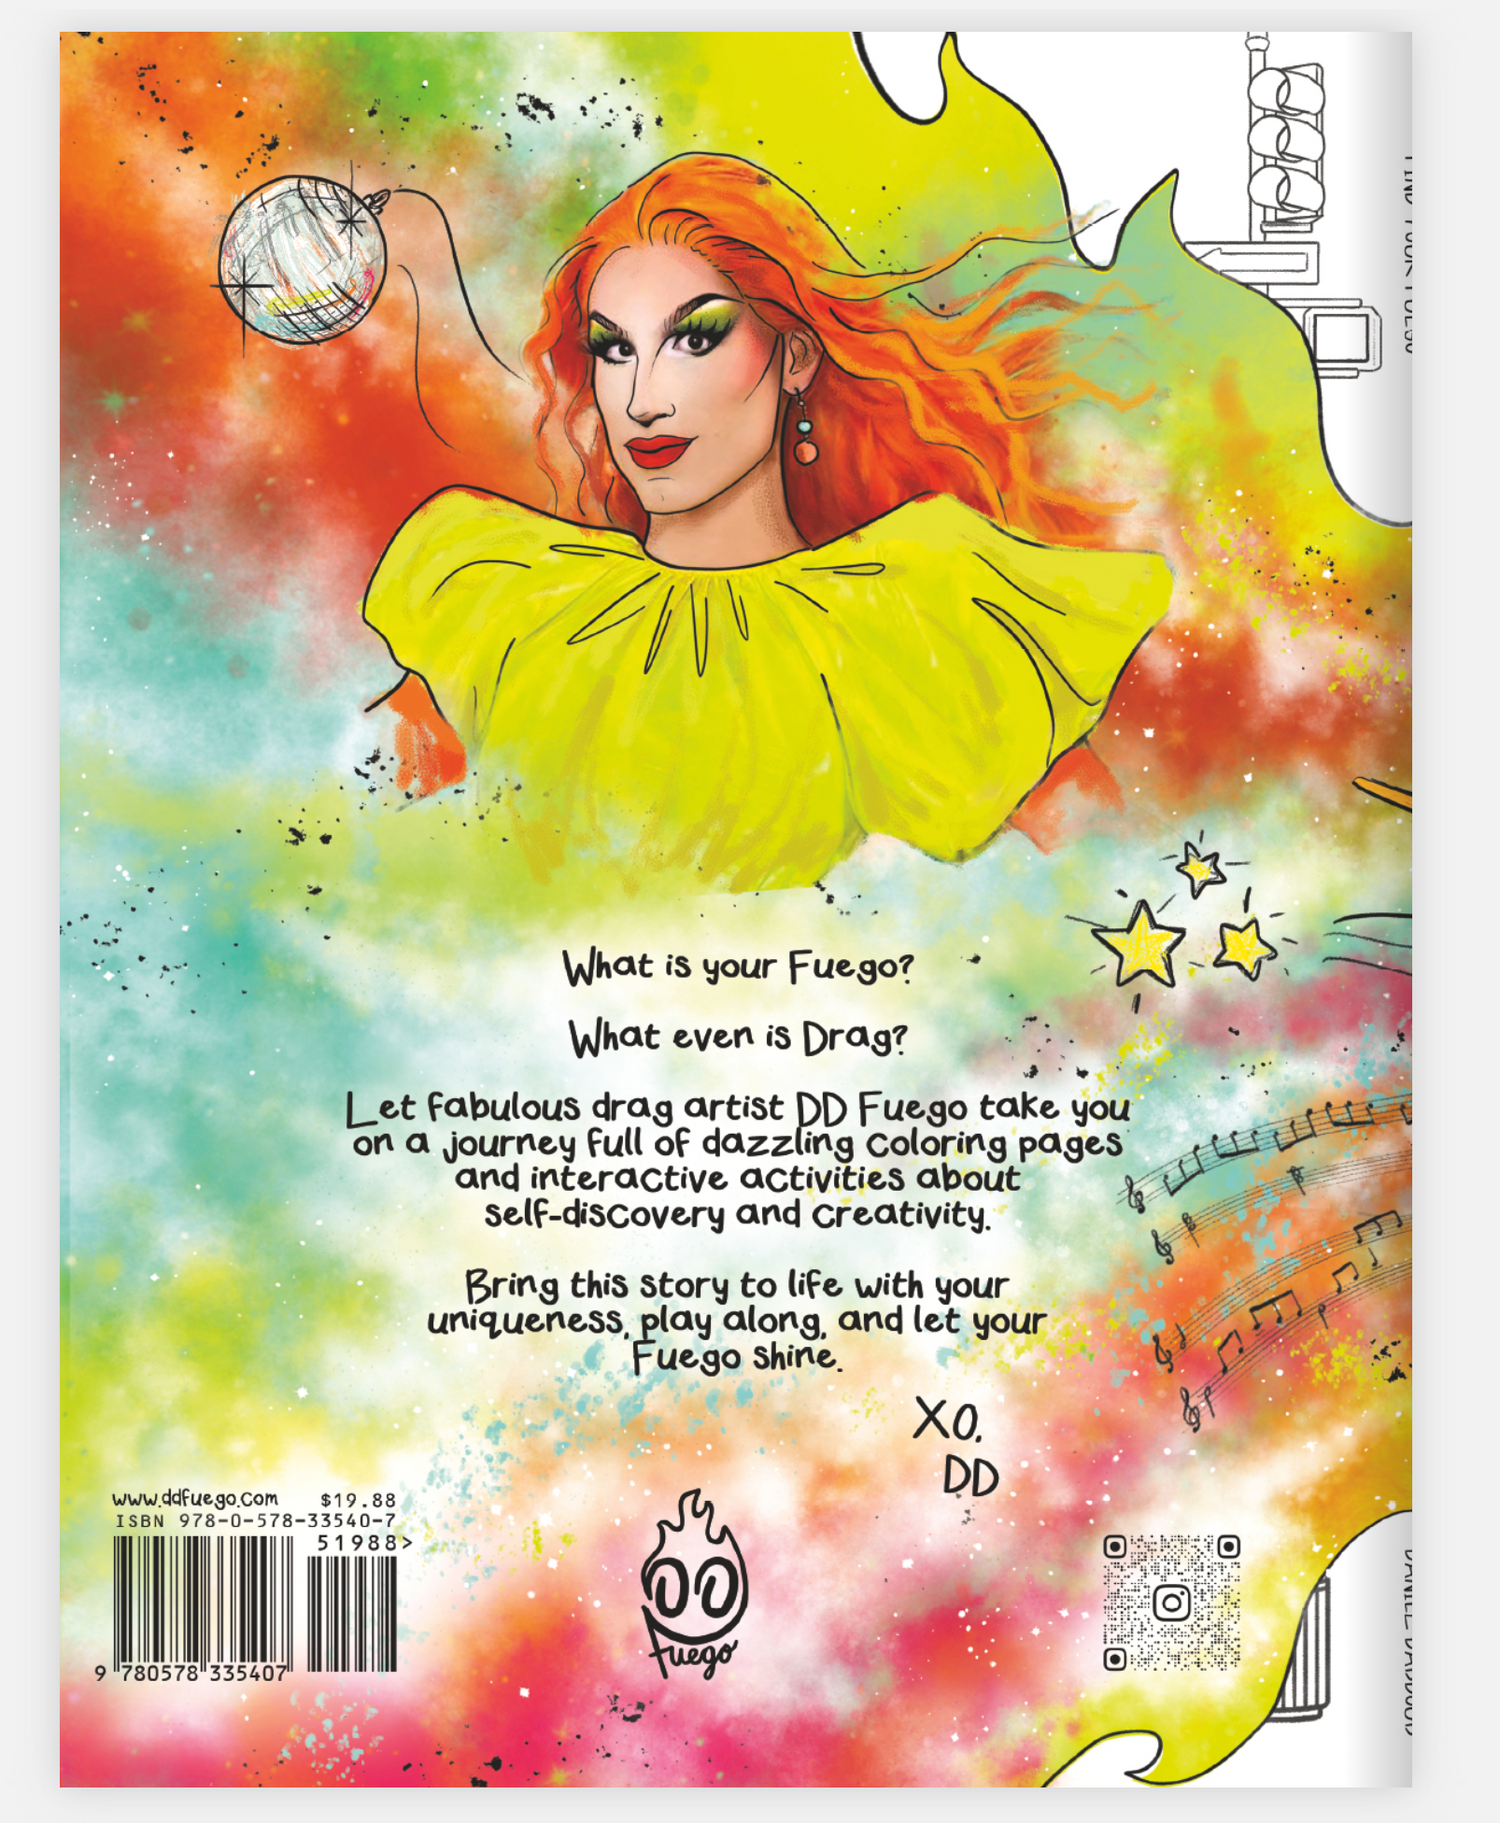 Back cover of the book "Find Your Fuego: Color Your World With Drag"